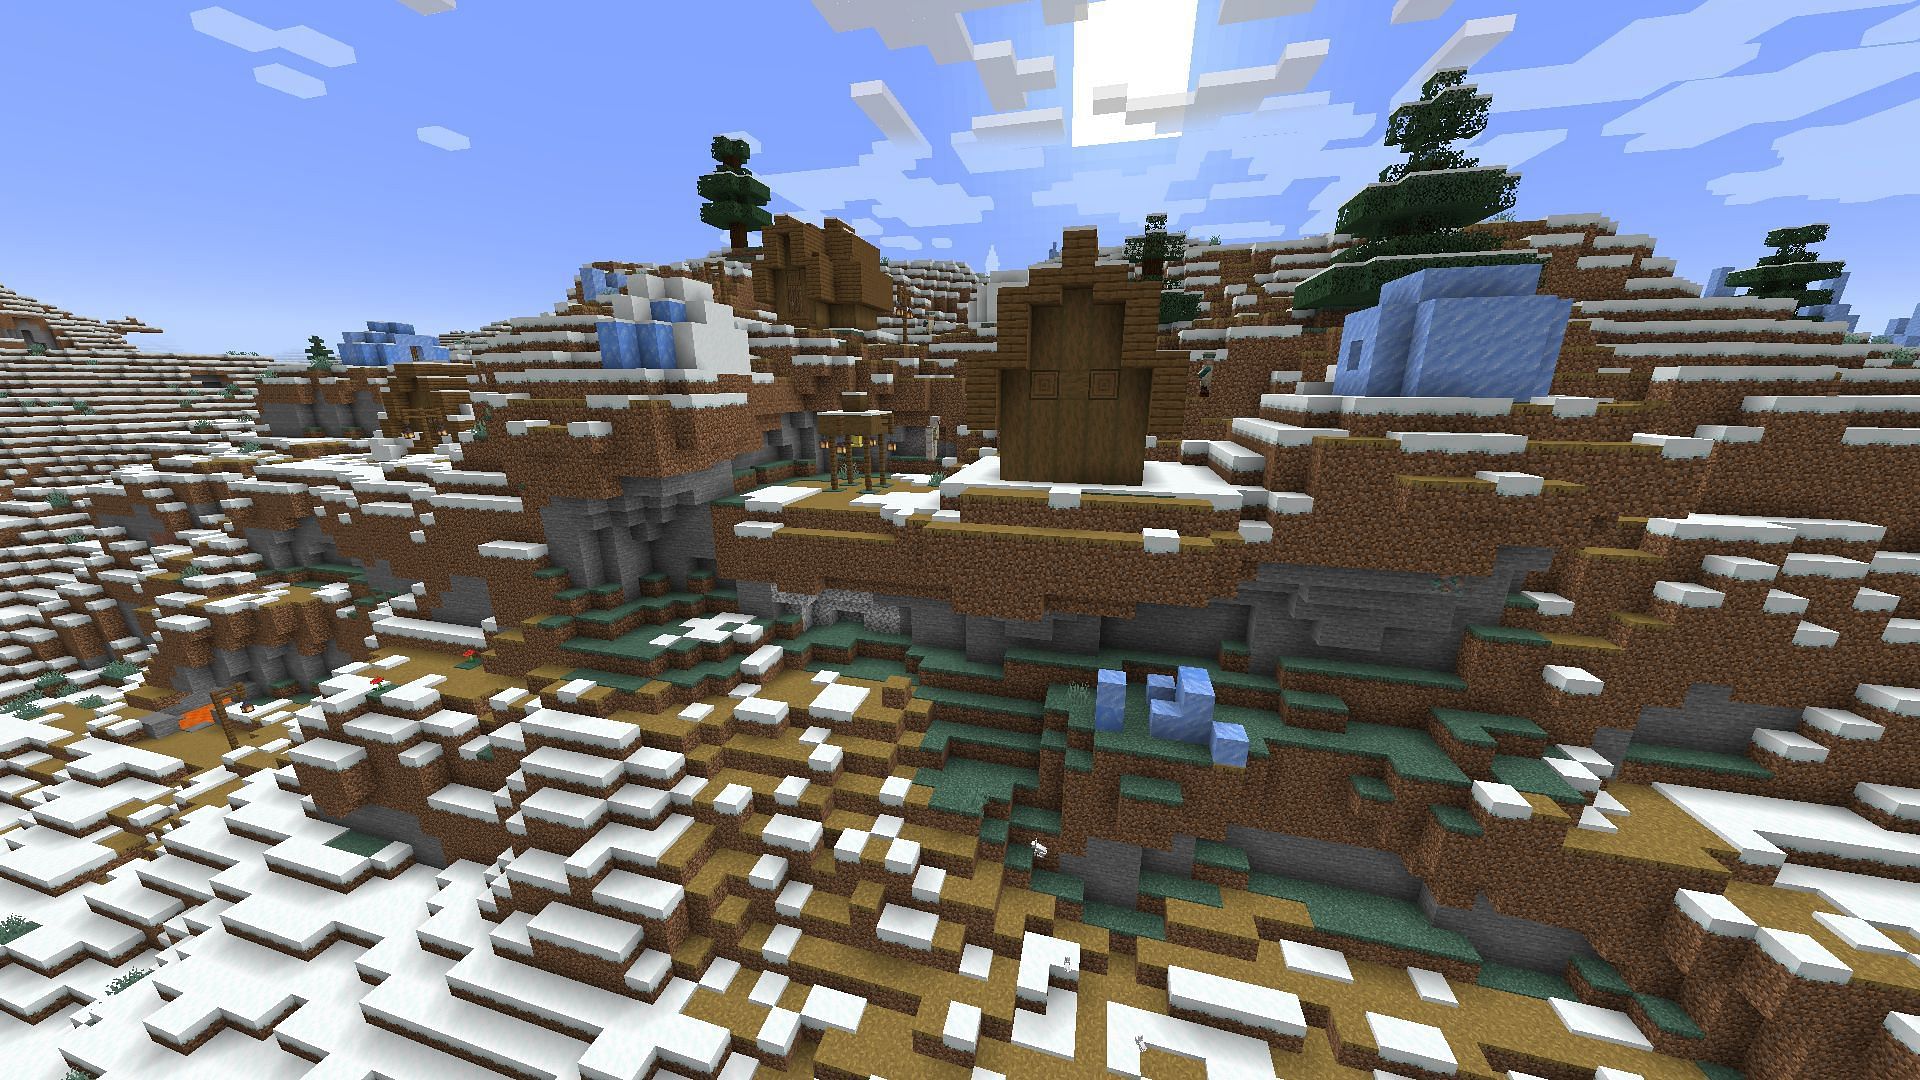 Snowy Village on a cliff right beside the ice spikes biome in Minecraft (Image via Mojang)